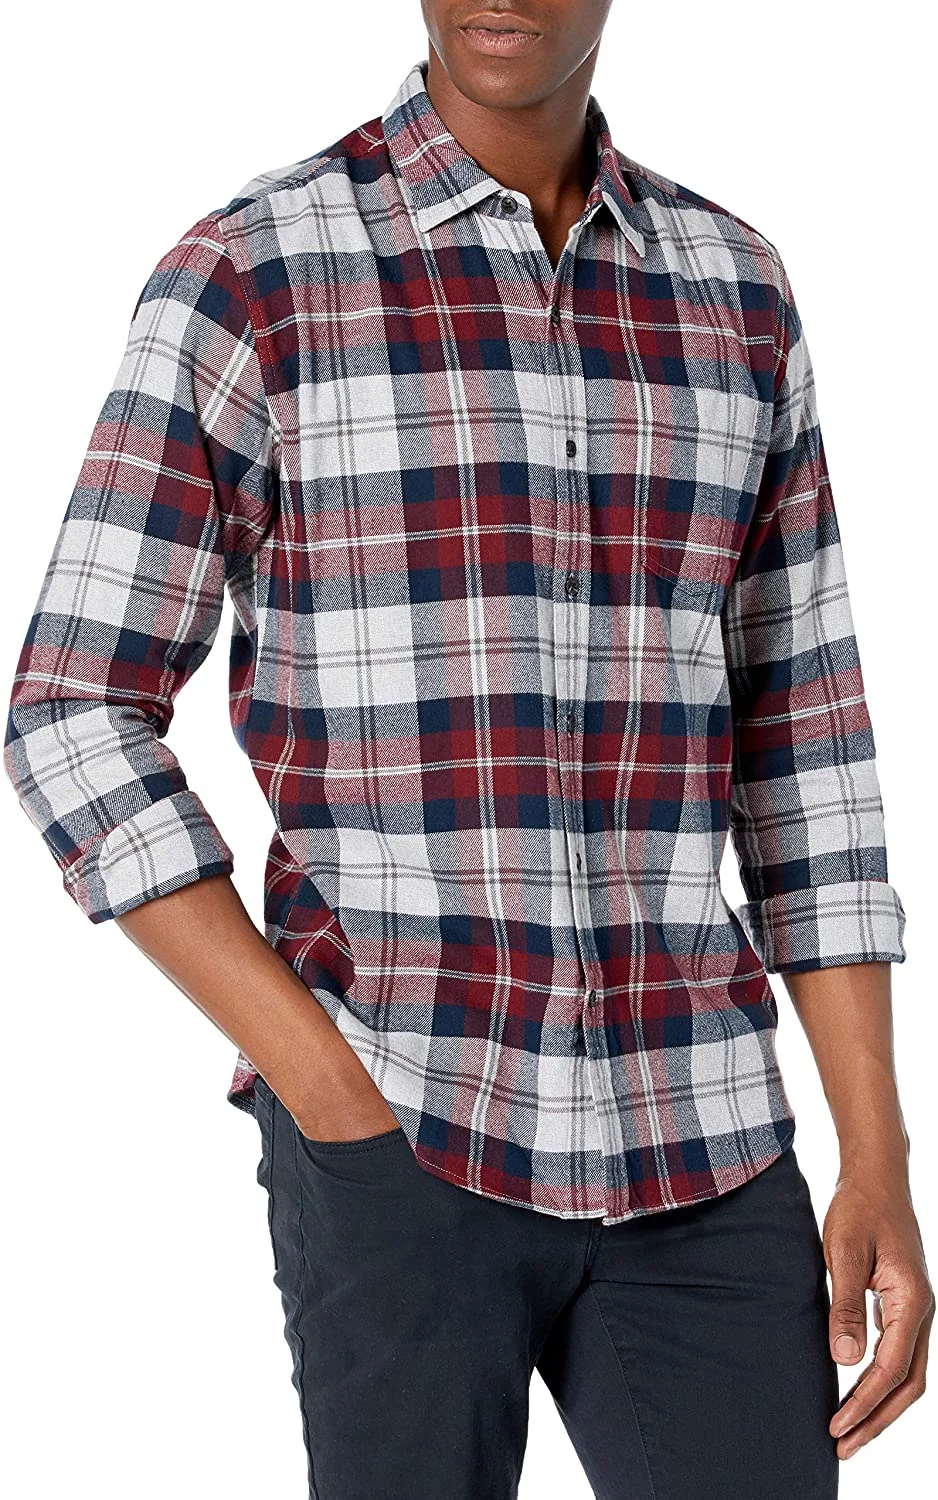 Wholesale Men Slim Fit Long Sleeve Flannel Shirt Manufacturers In Bangladesh Factory Supplier